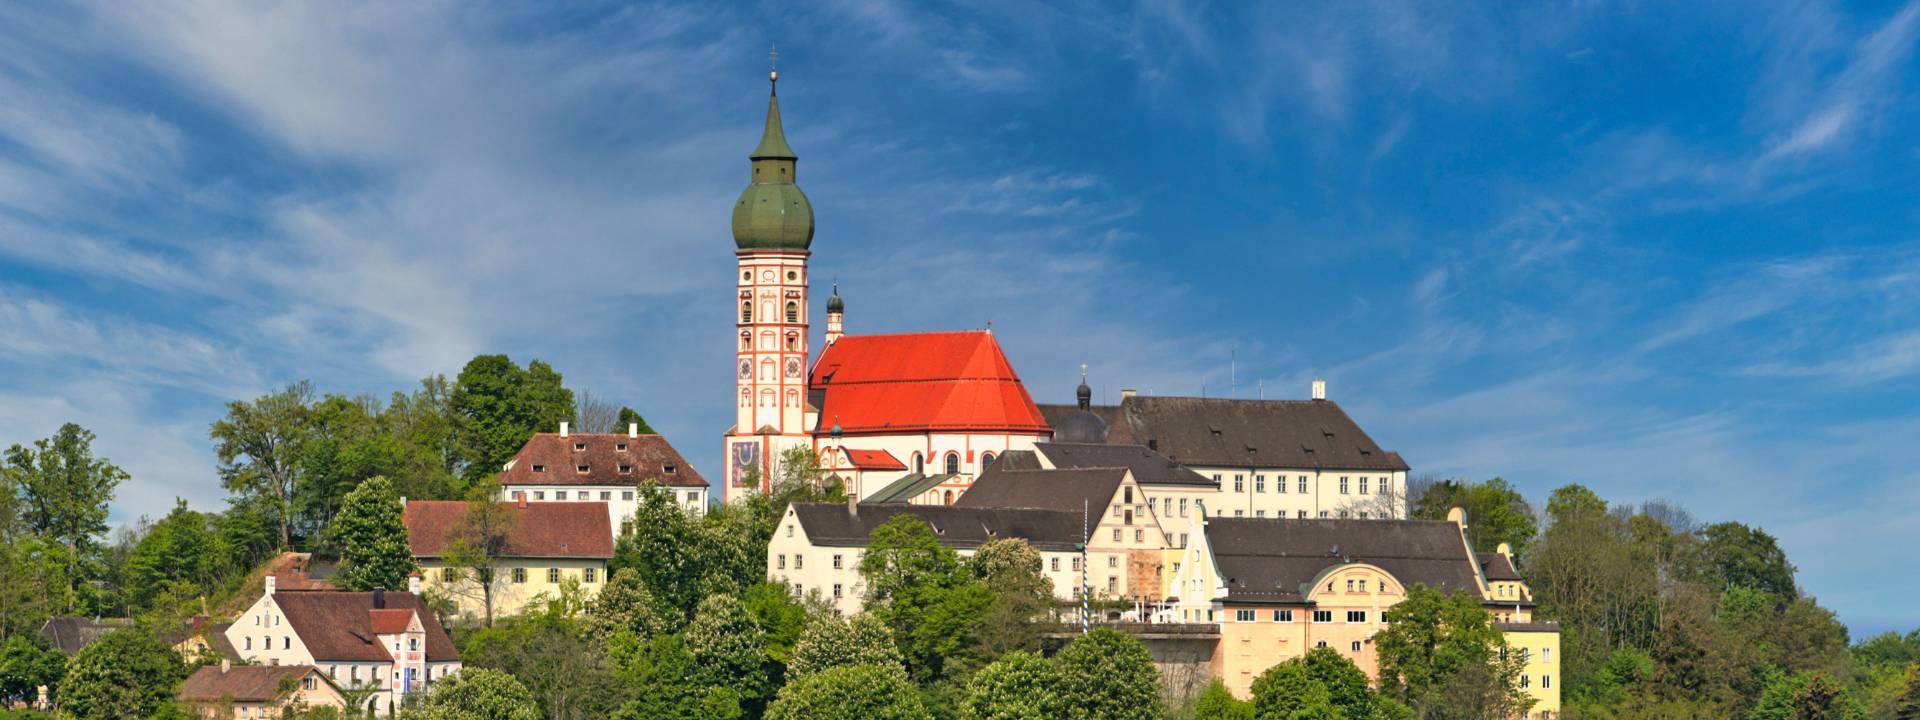 Getting from Munich to Andechs by train, bus or cycle